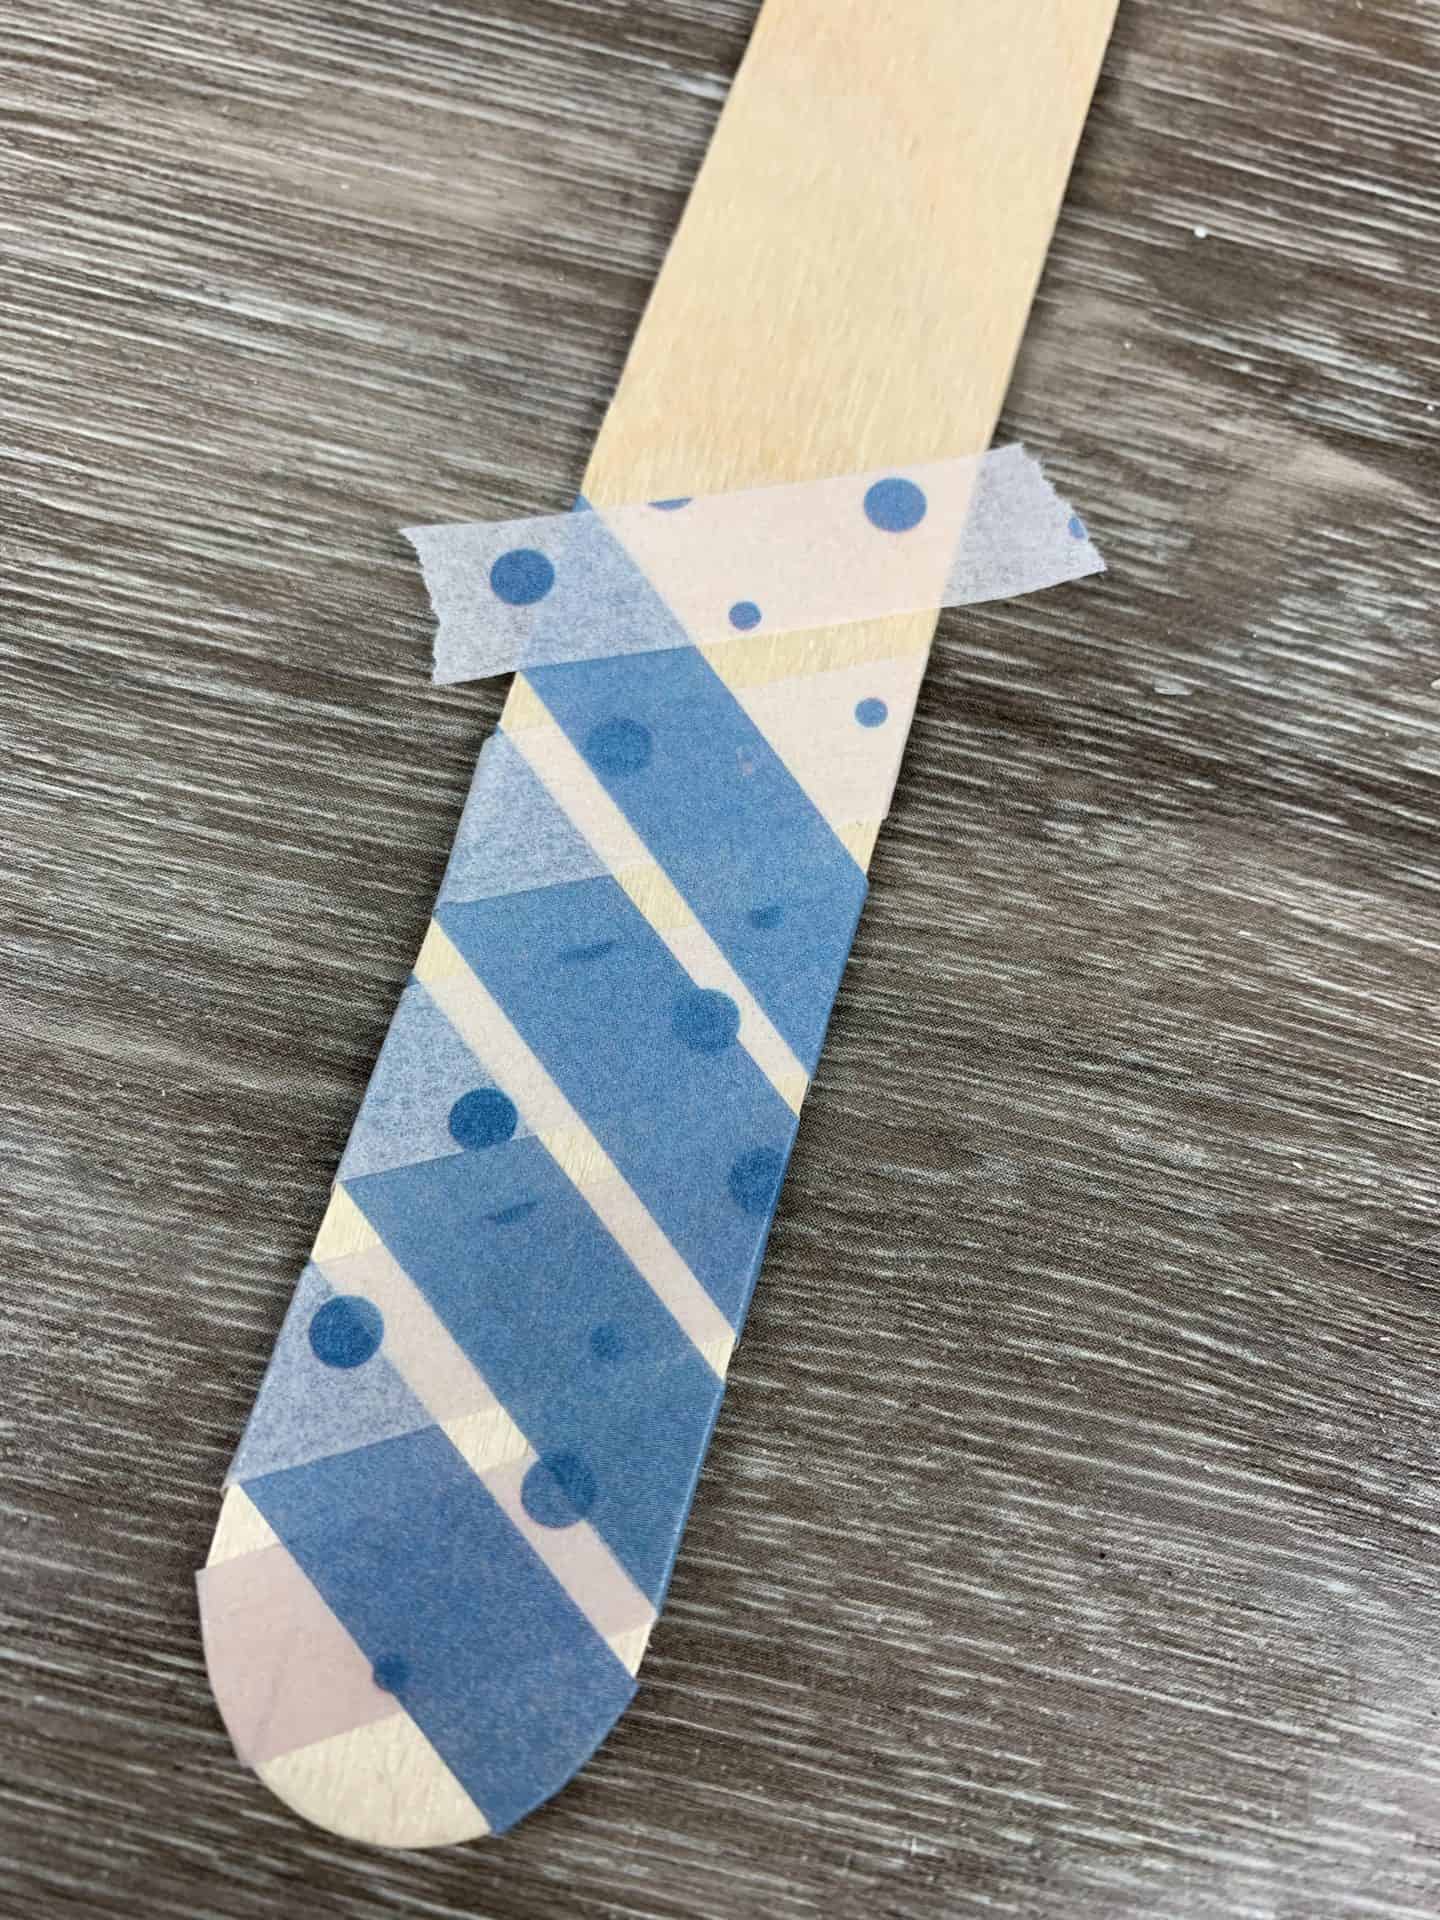 Washi Tape Bookmarks: Crafts for Kids - Typically Simple